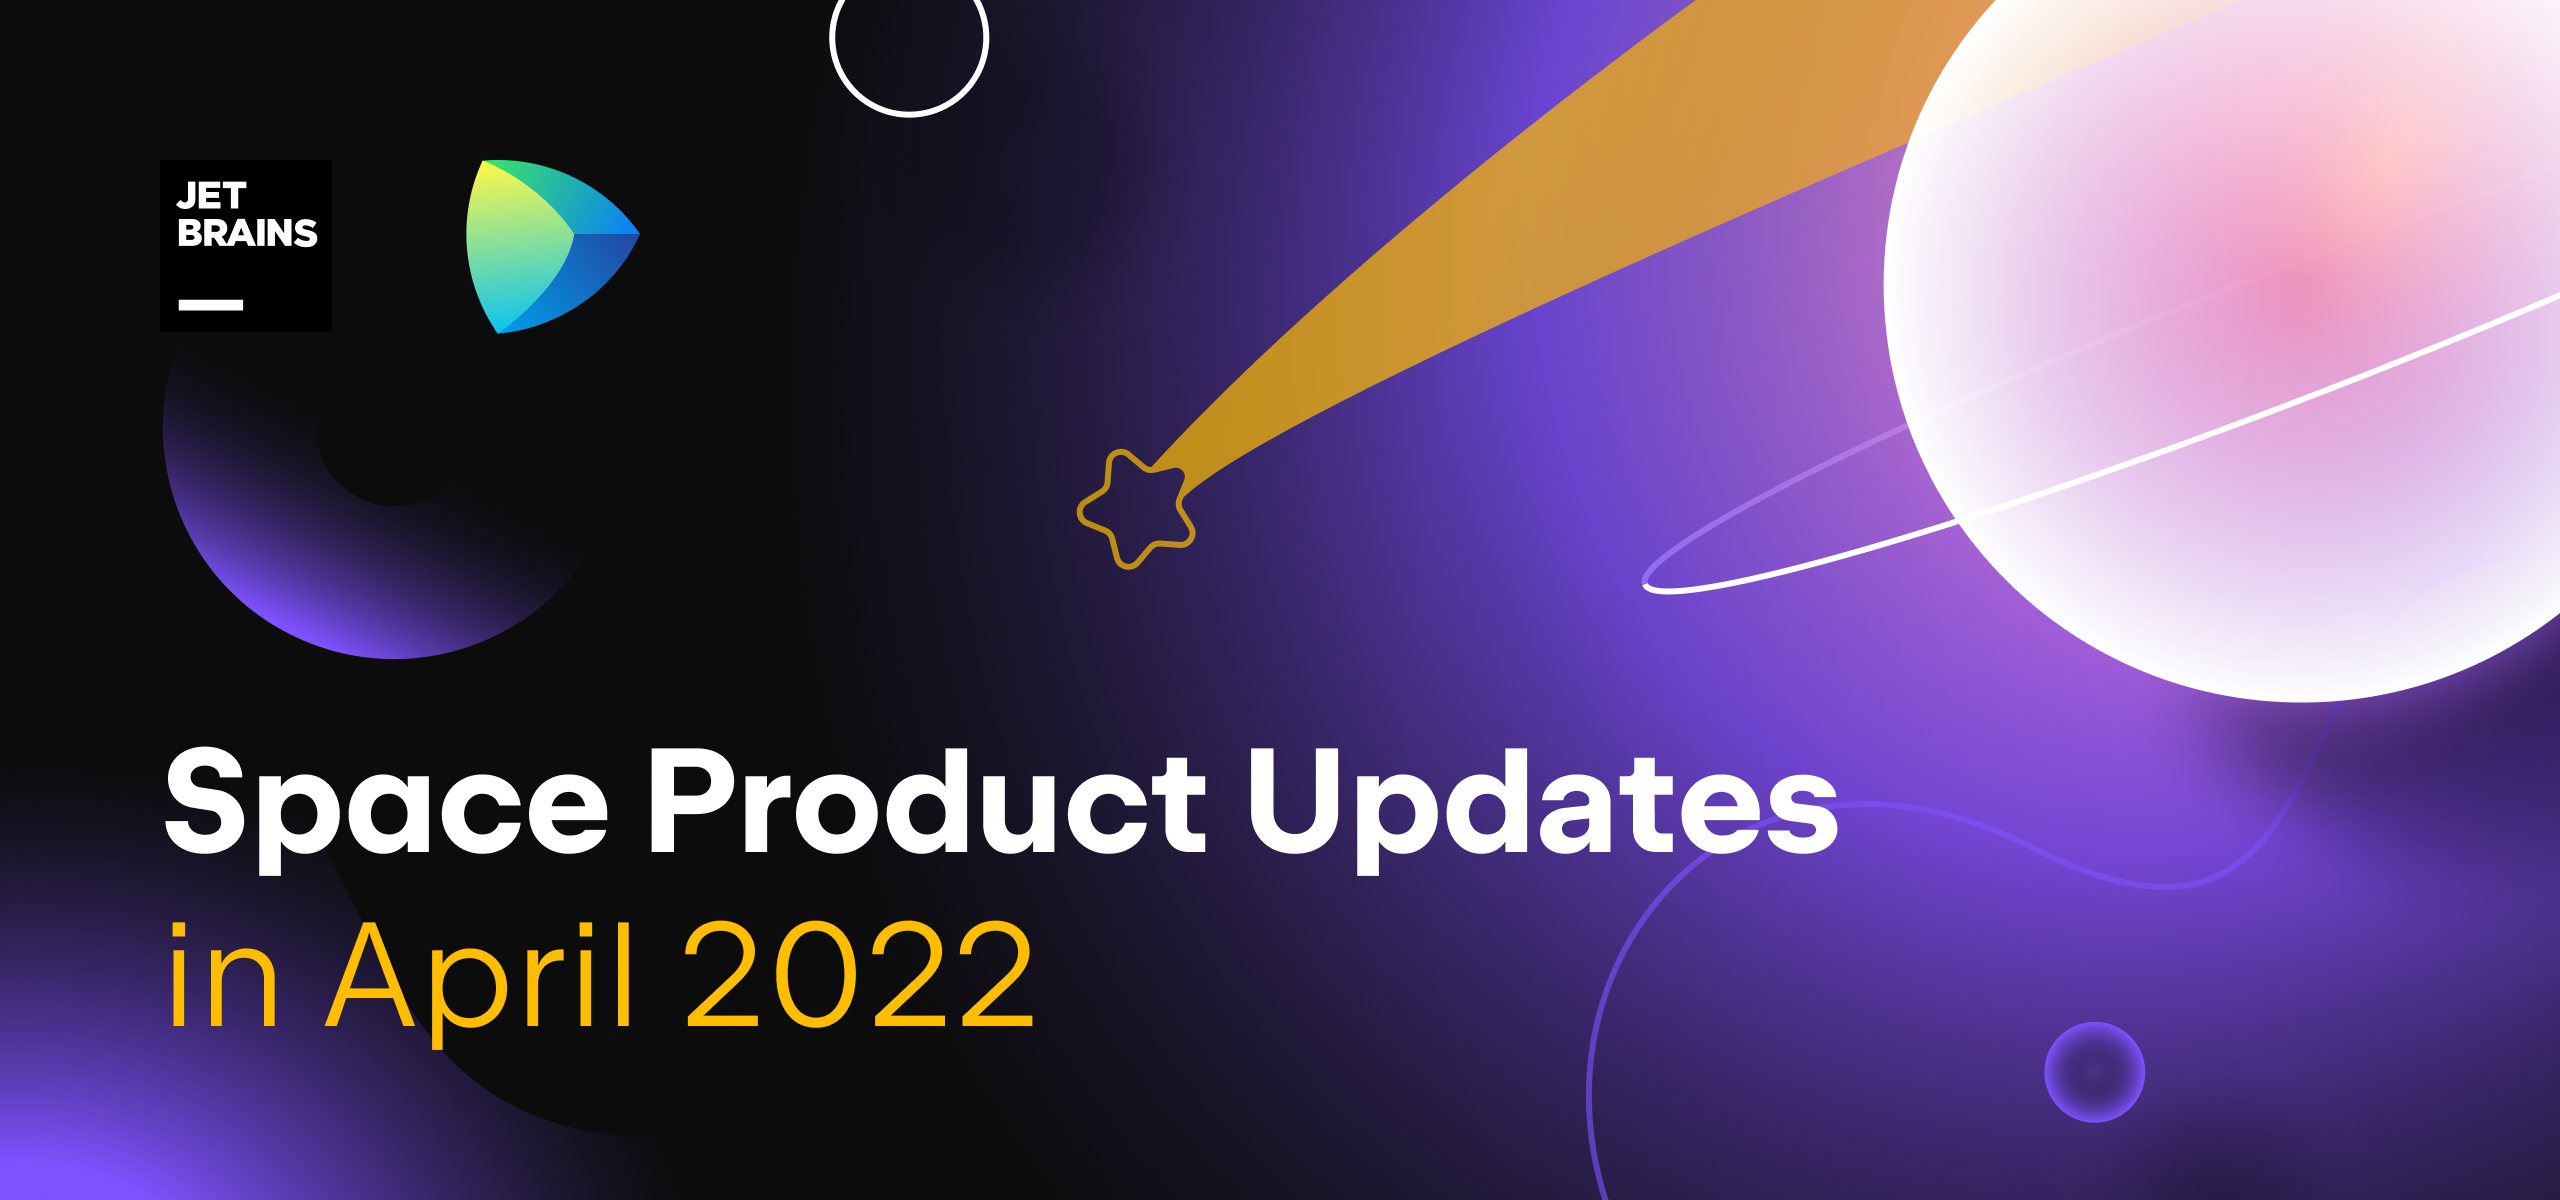 Space Product Updates in April 2022